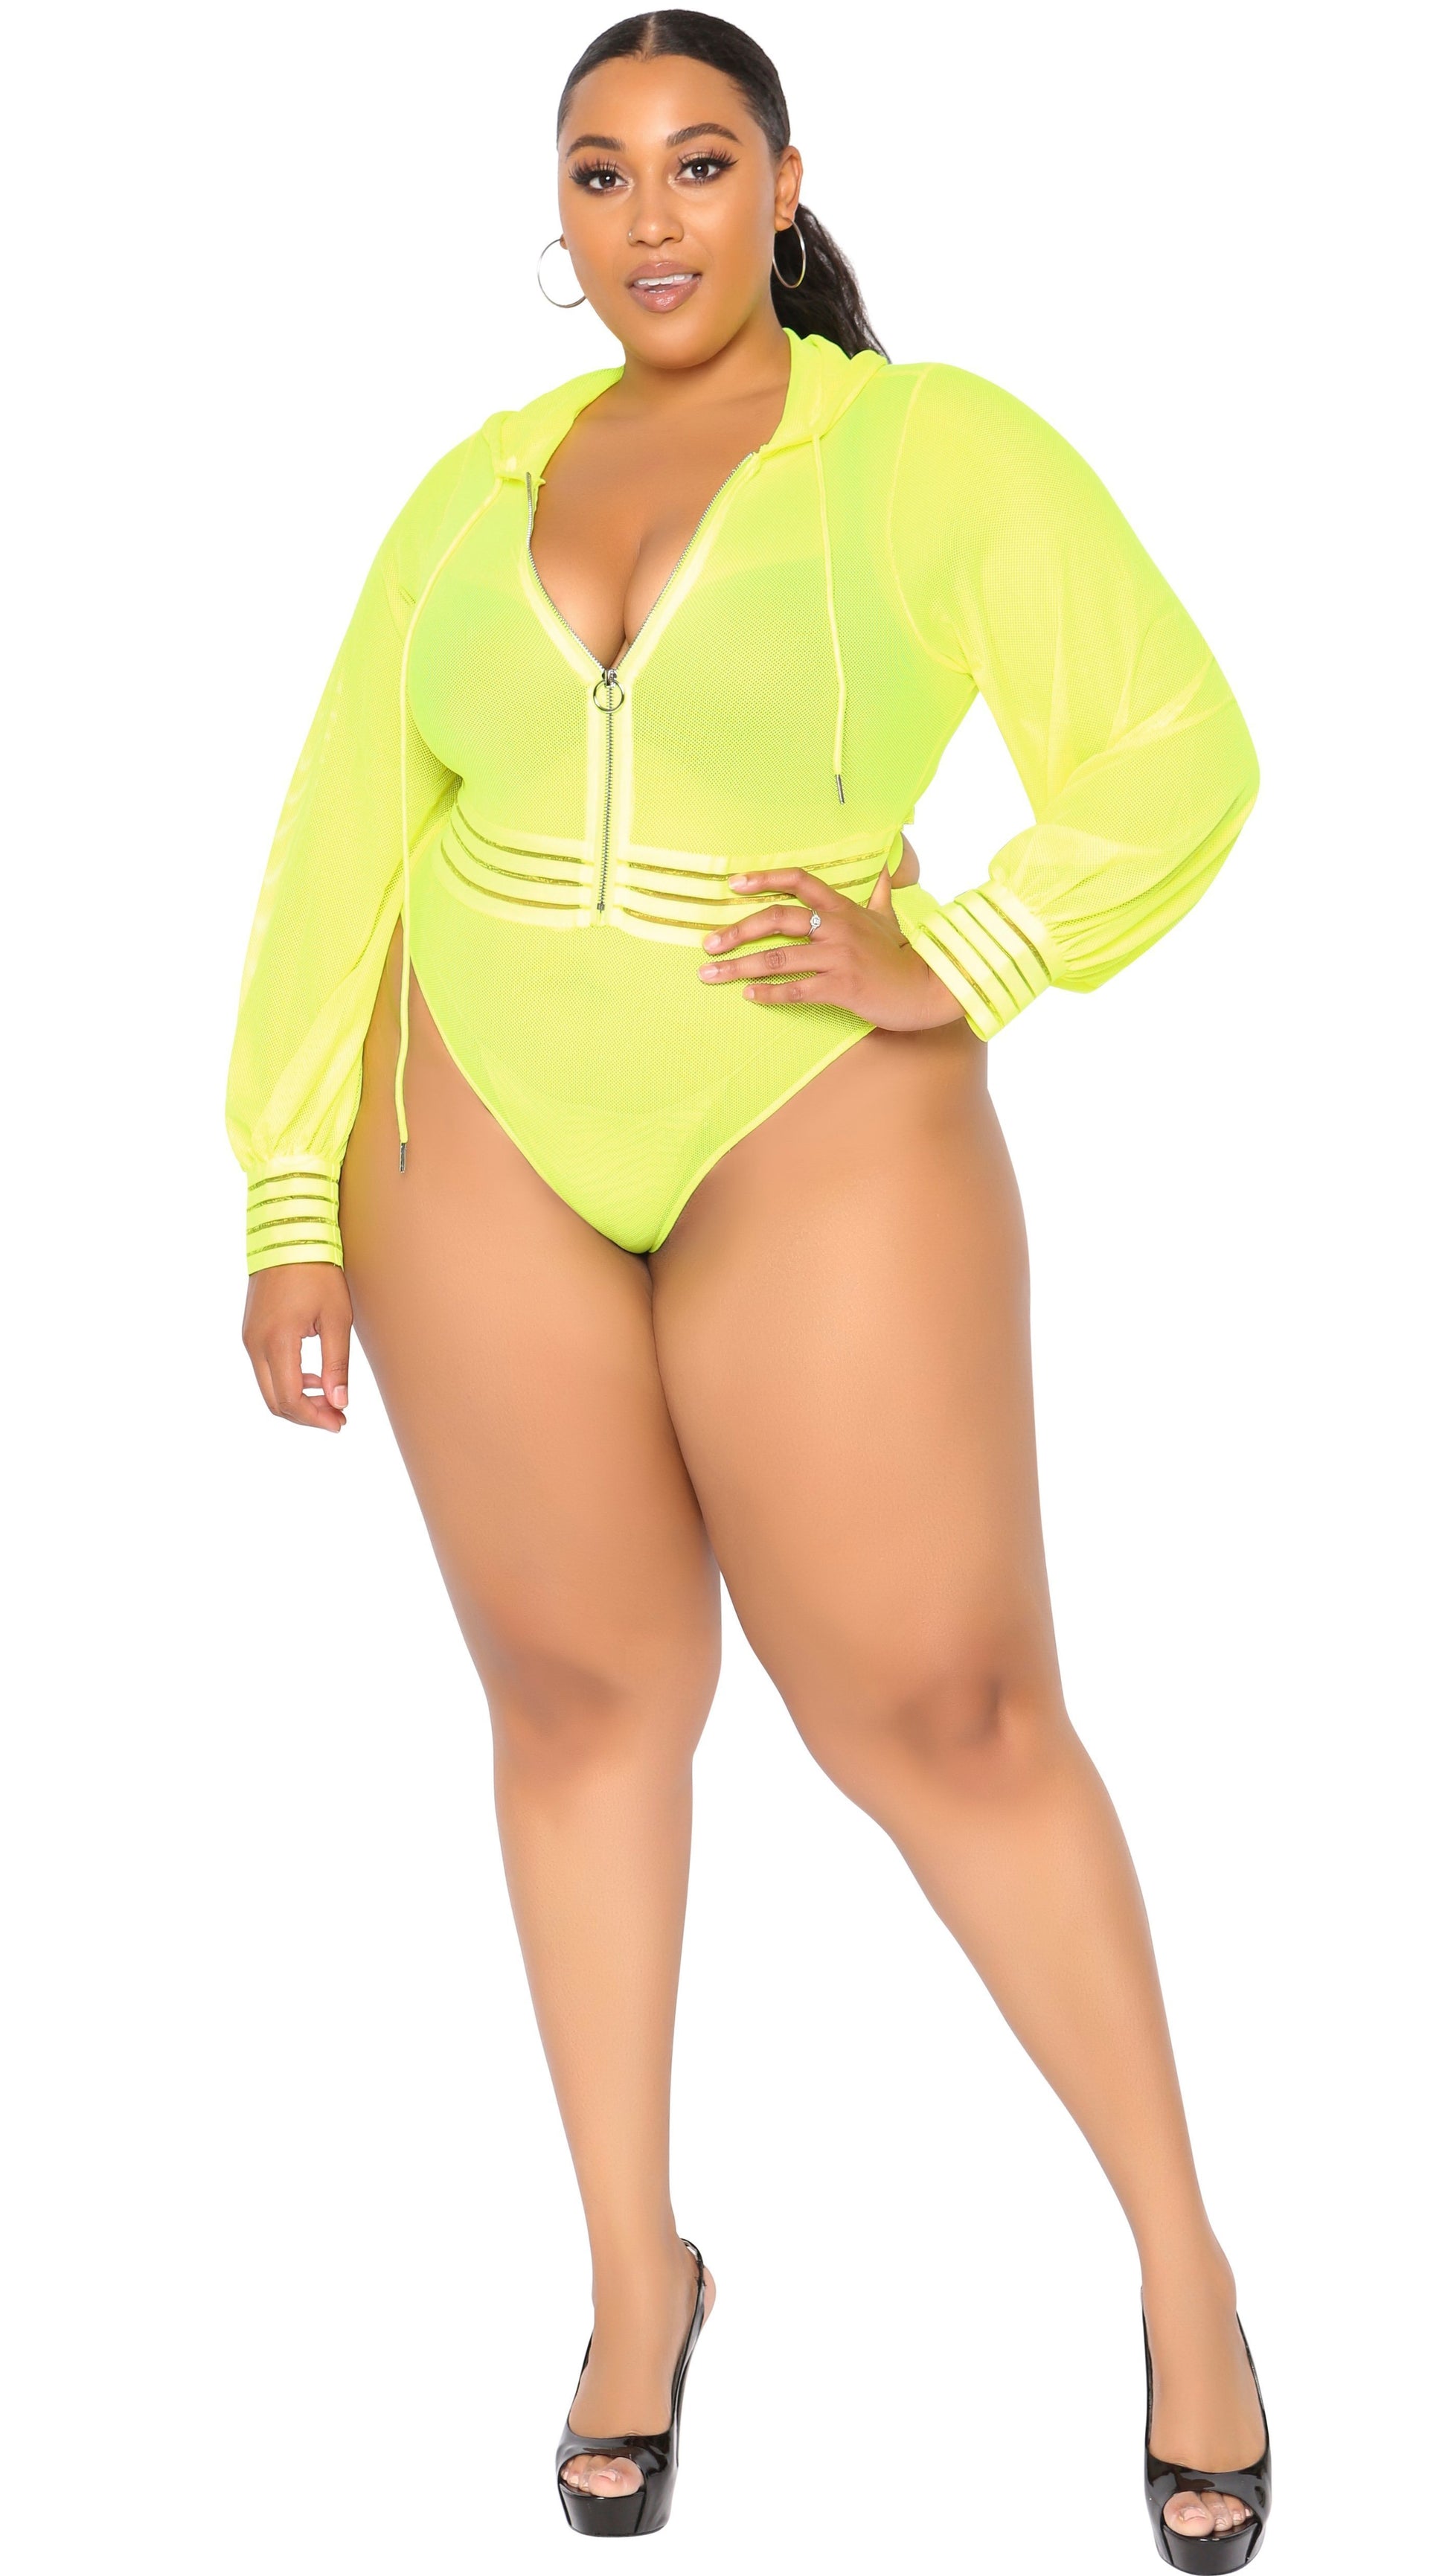 https://boughie.com/cdn/shop/products/Too-Much-Sauce-Hooded-BodysuitSwimwear-Highlighter-Bodysuits-Boughie_67f6e90f-3596-41ef-a3ff-85e9070c0af5.jpeg?v=1629825284&width=1946